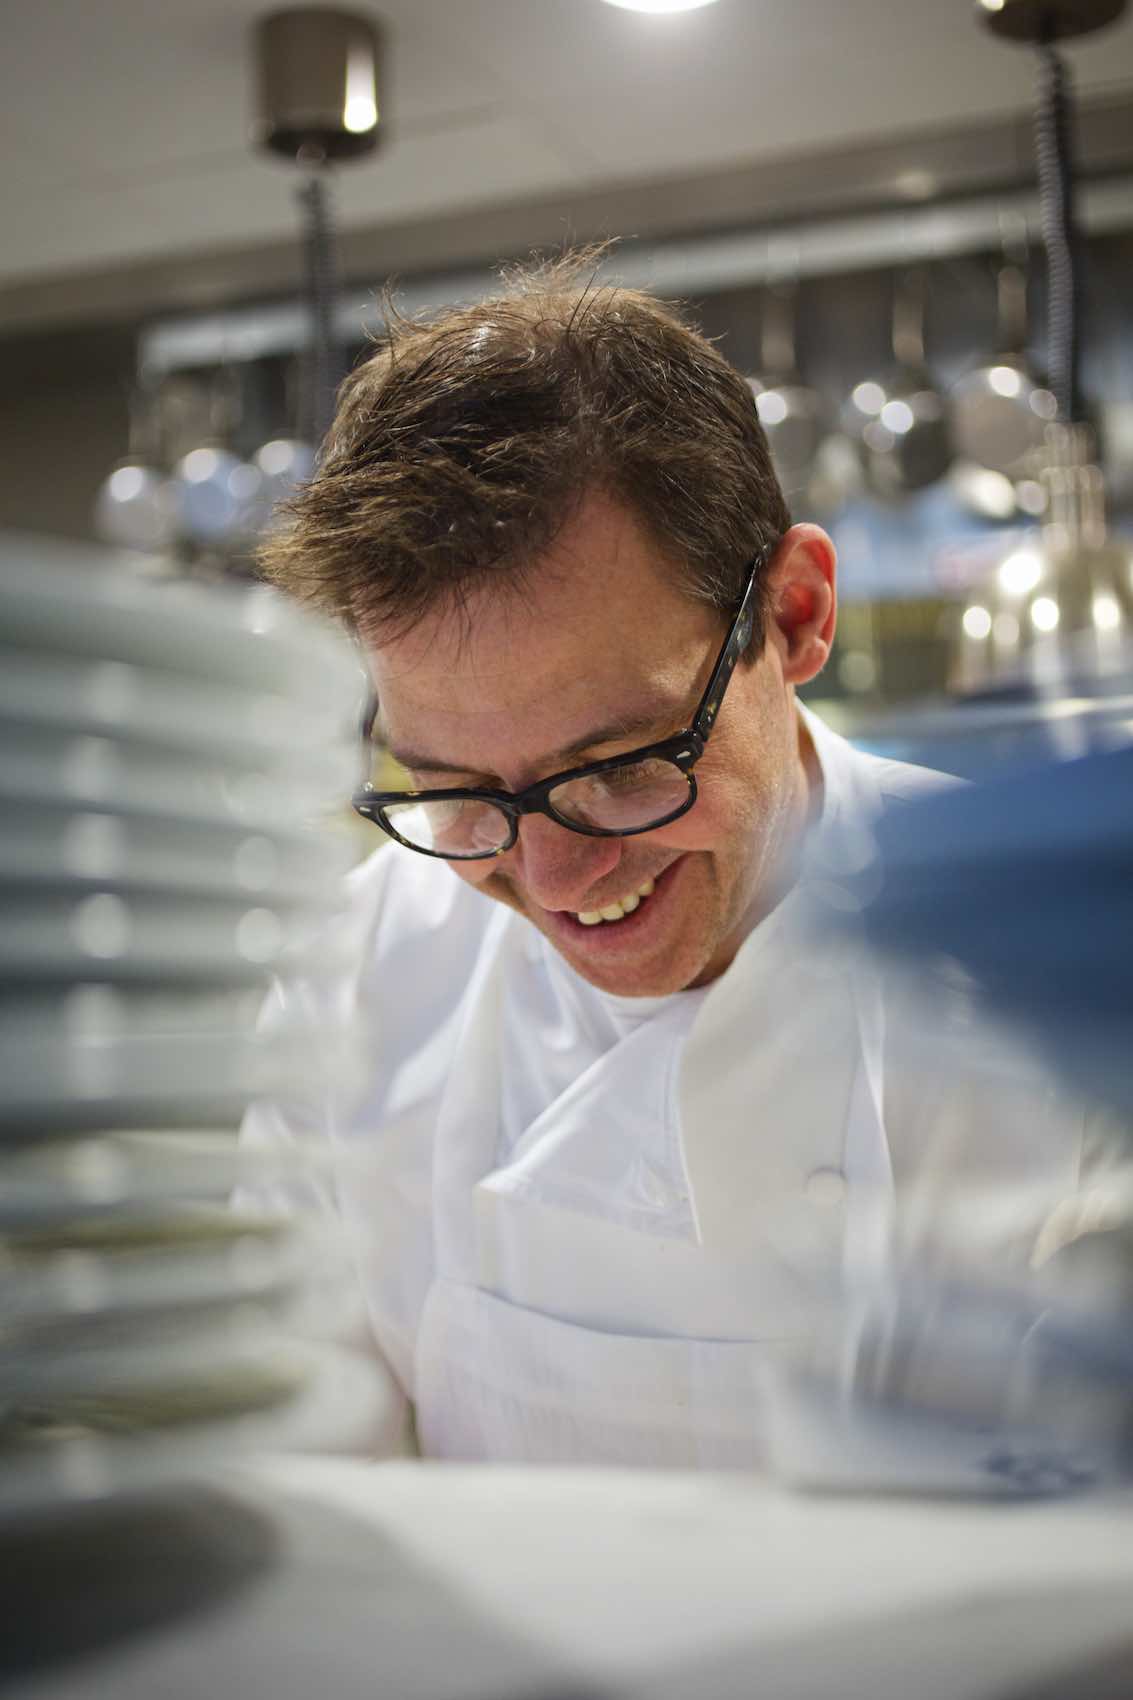 Jody Horton Photography - Chef smiling while working in the kitchen.